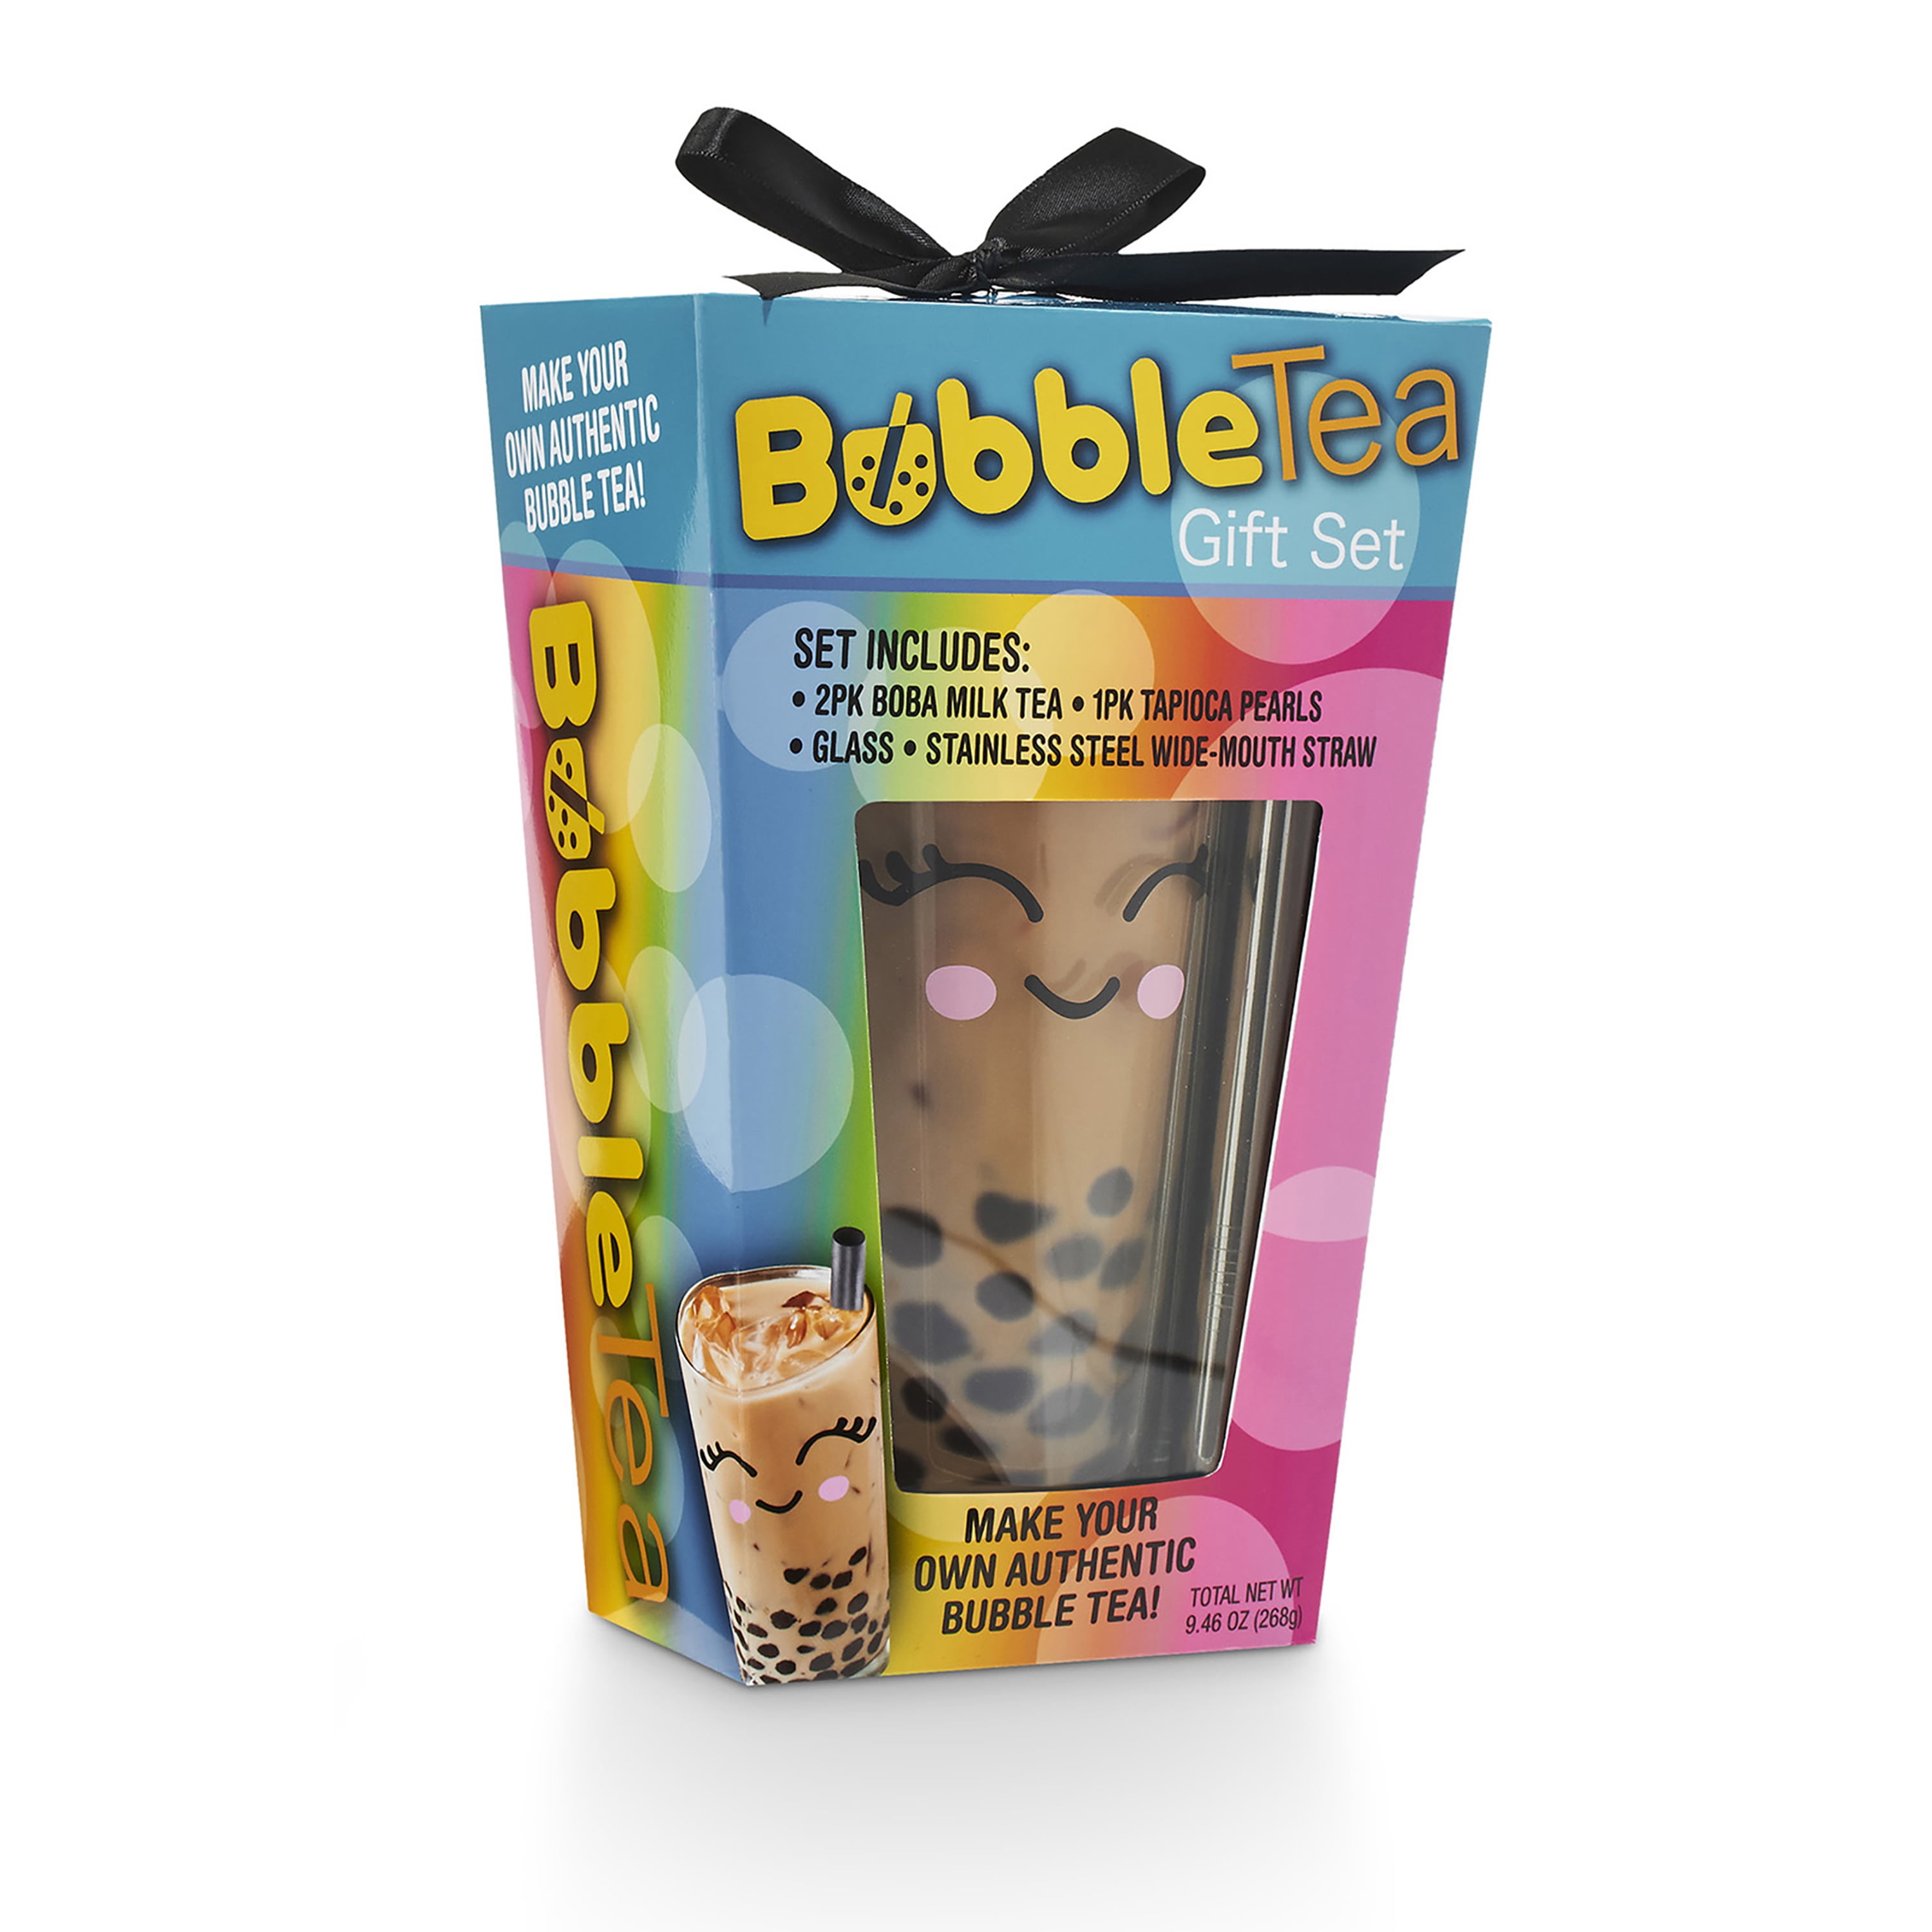 None Bubble Tea Kit with Stainless Steel Straw Christmas Gift Set 9.4oz